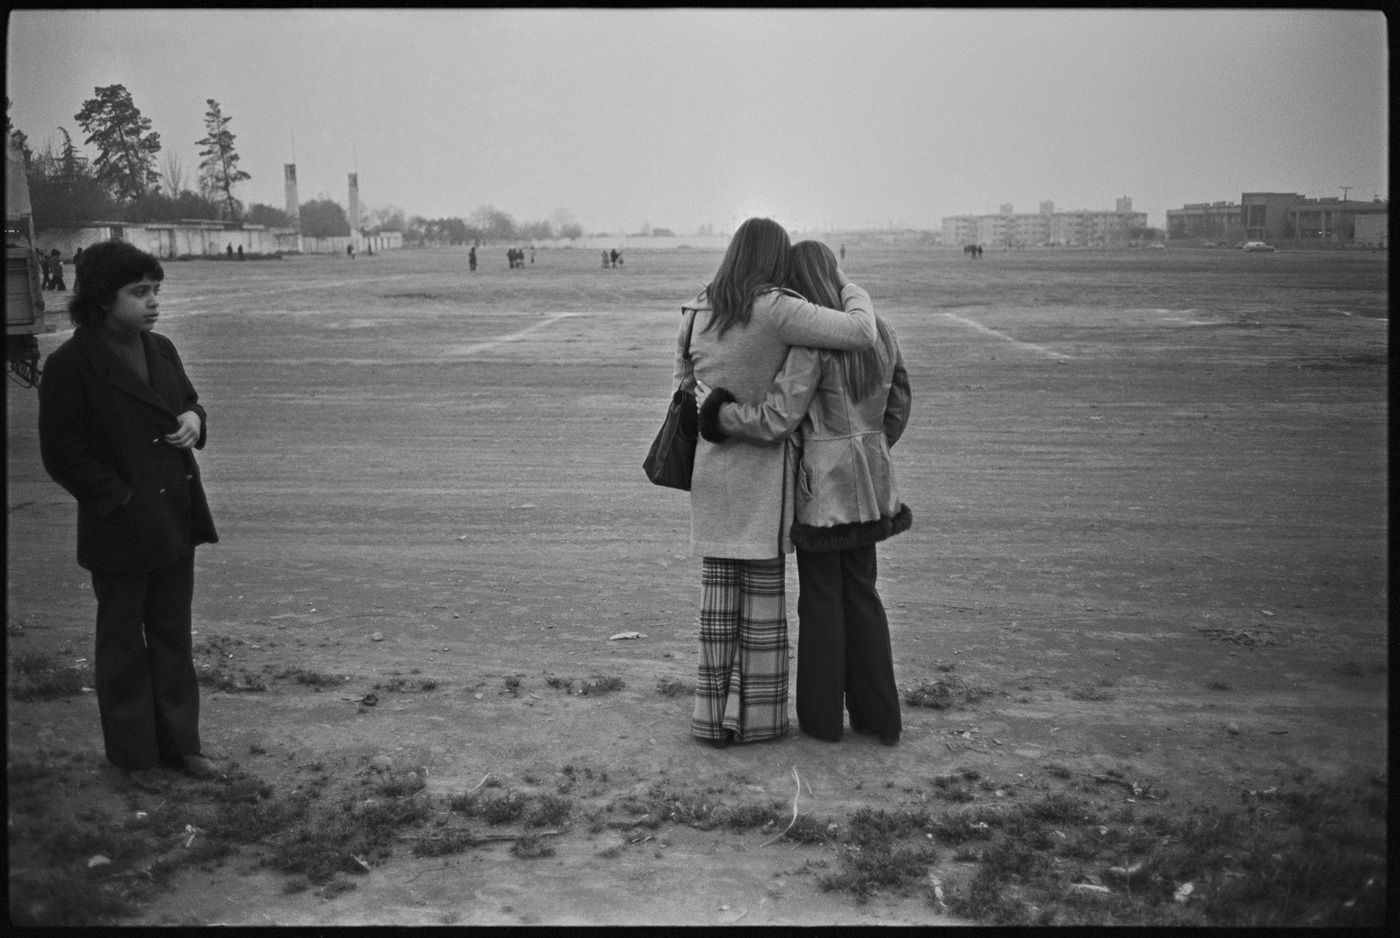 Outside the stadium, two young women comfort each other as they fail to get information about loved ones, as prisoners at the stadium. : Chile: 40 Years After the Coup d'Etat : David Burnett | Photographer